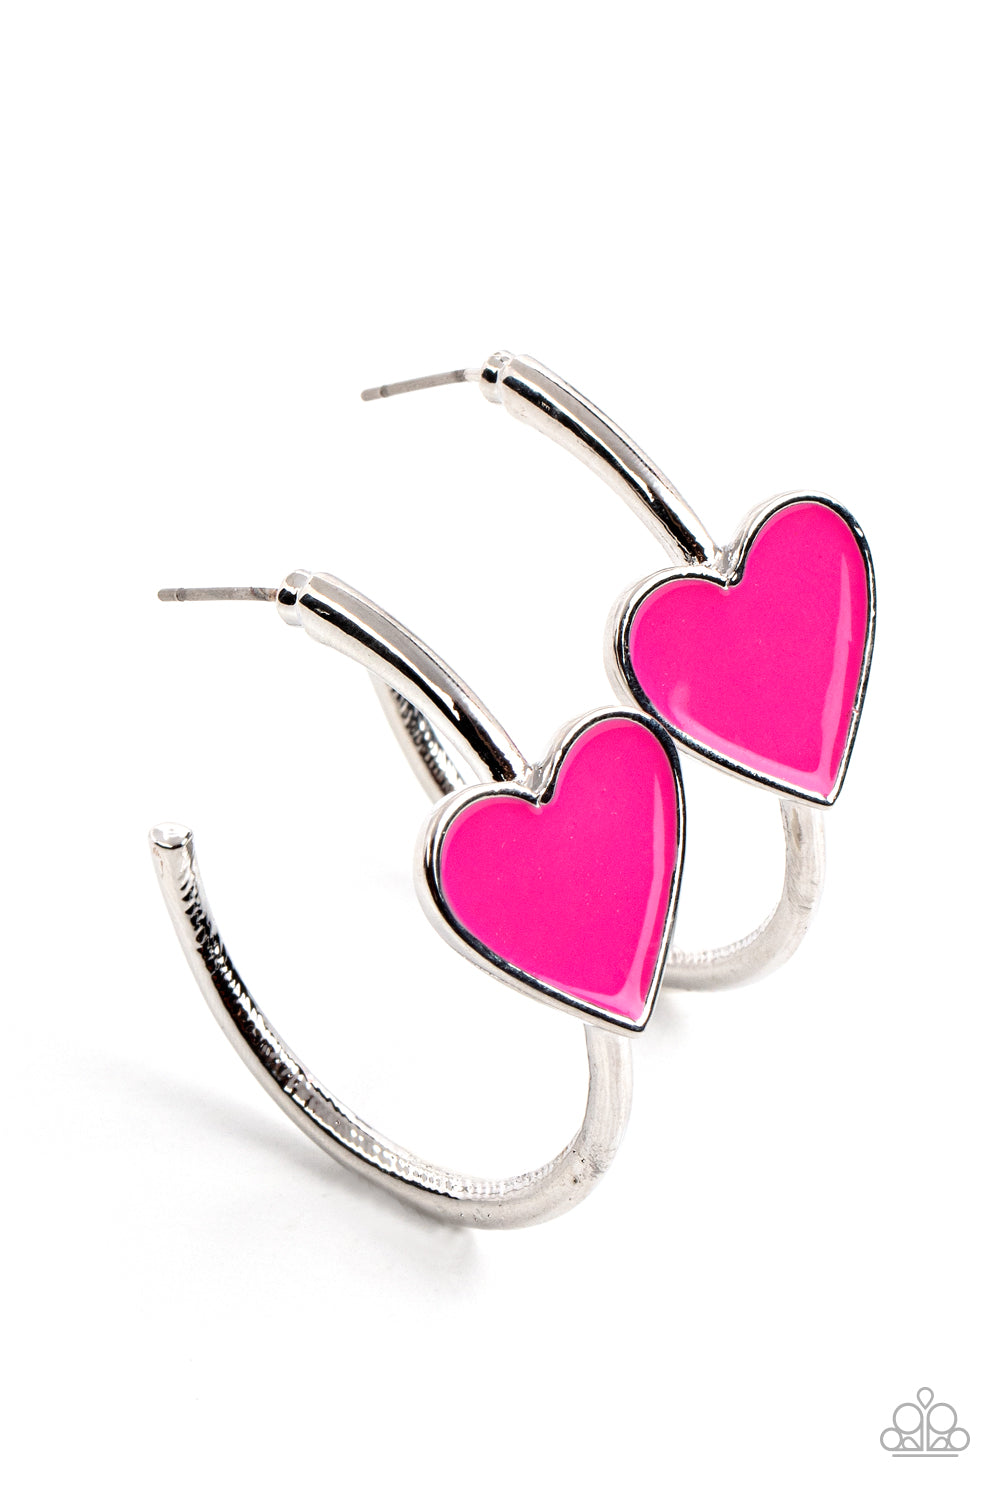 Kiss Up - Pink Heart Hoop Hearrings a charming Fuchsia Fedora heart adorns the front of a classic silver hoop resulting in a whimsical fashion. Earring attaches to a standard post fitting. Hoop measures approximately 1 1/4" in diameter.  Sold as one pair of hoop earrings.  Paparazzi Jewelry is lead and nickel free so it's perfect for sensitive skin too!